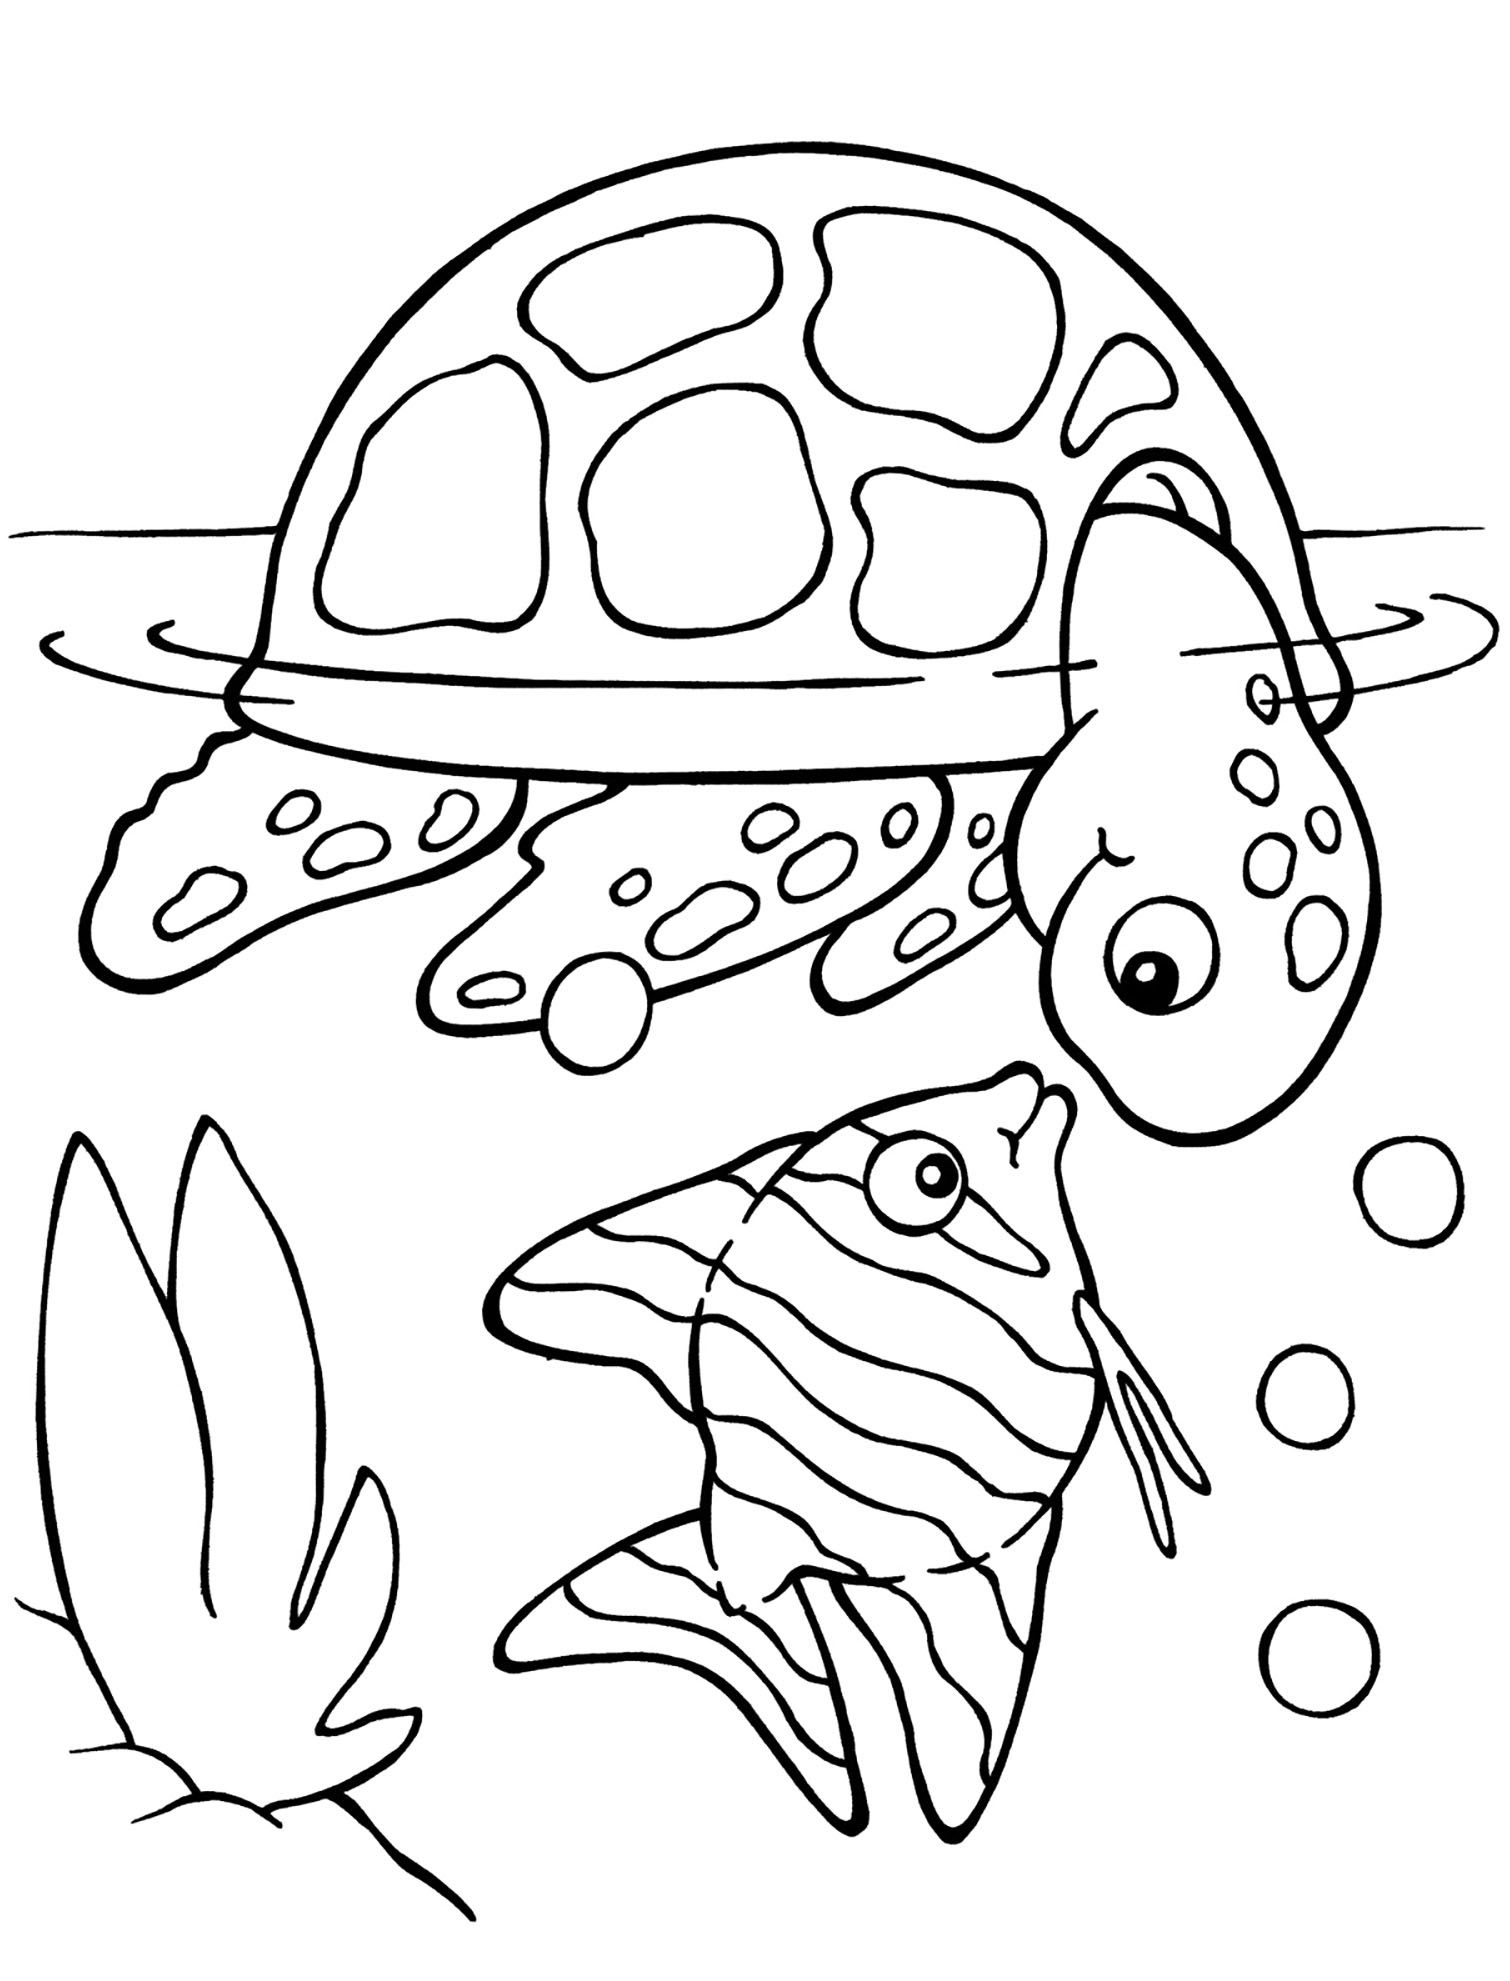 Free colouring pages for kids